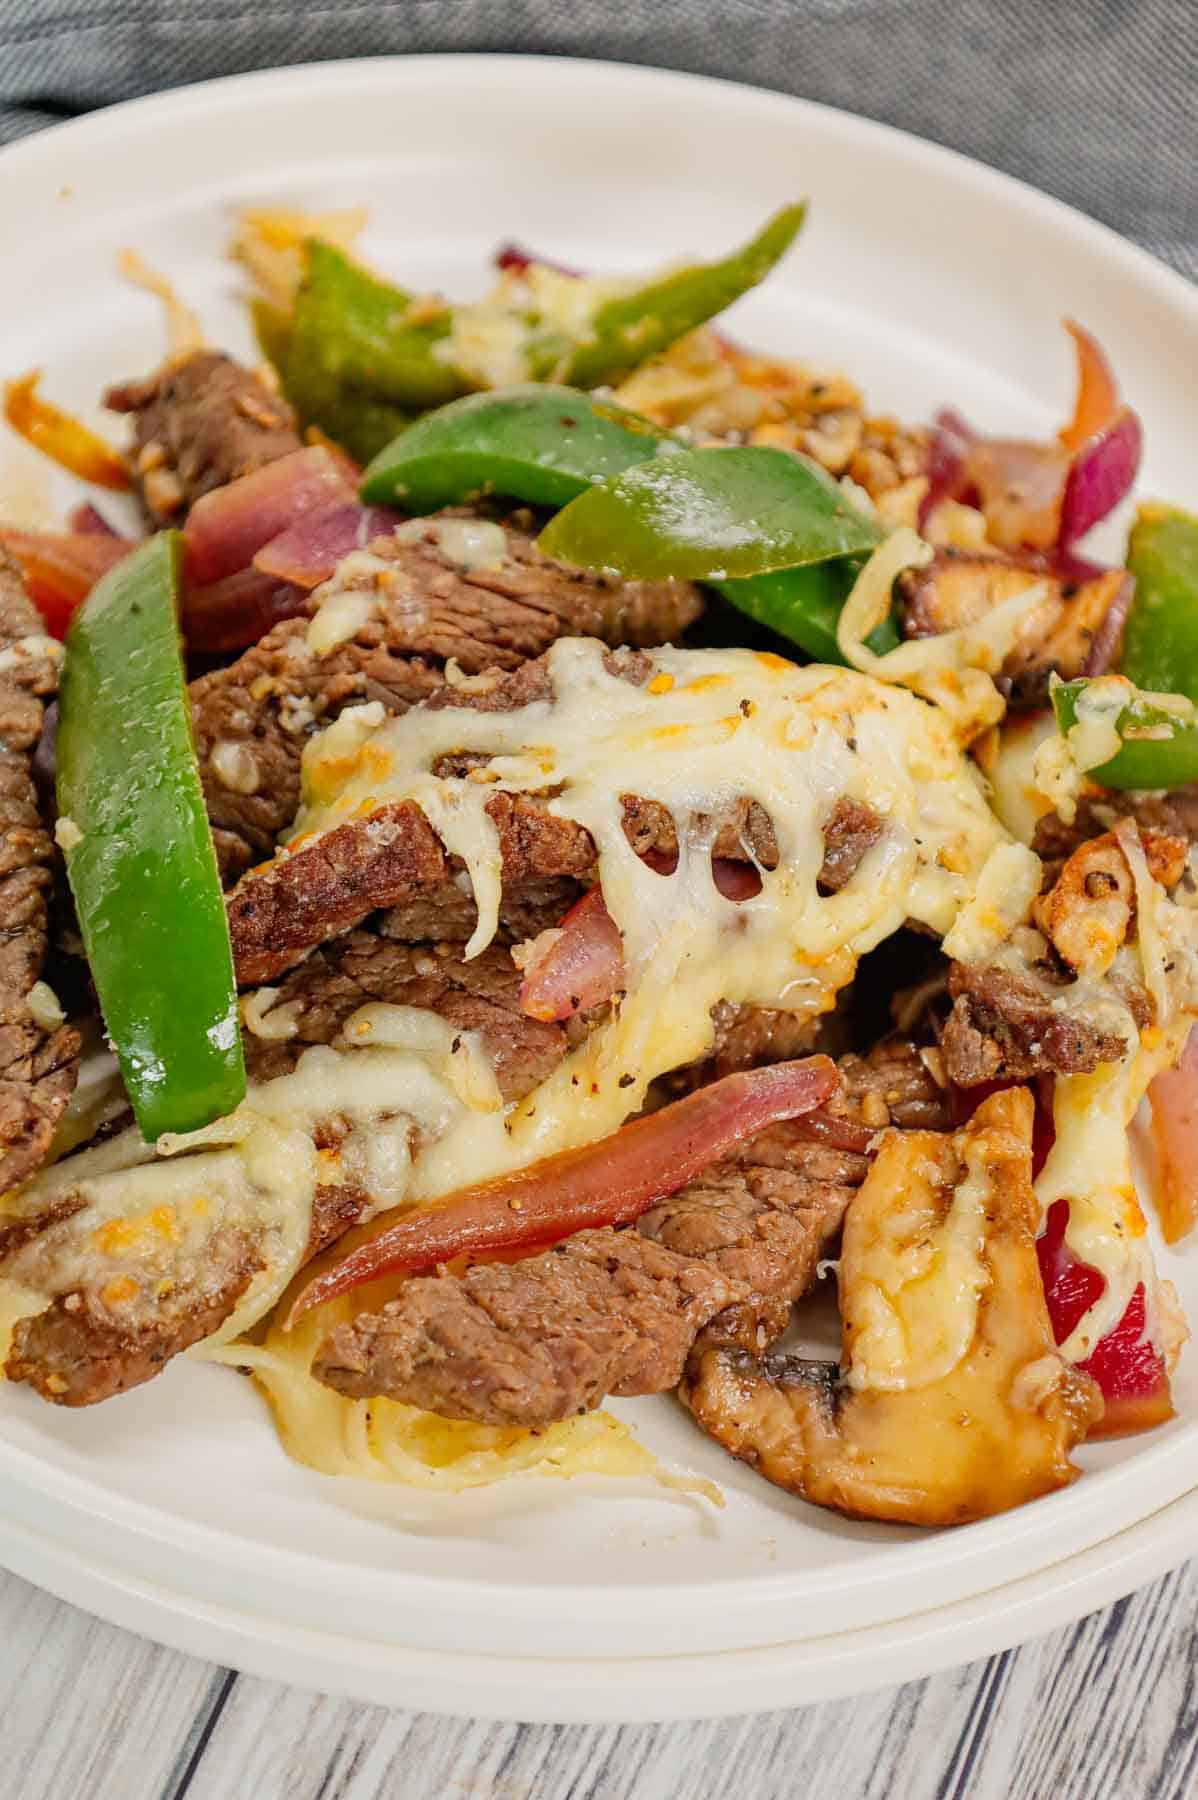 Philly Cheese Steak Skillet is a hearty dish loaded with steak strips, green bell peppers, red onions, sliced mushrooms and topped with a blend of mozzarella and provolone.